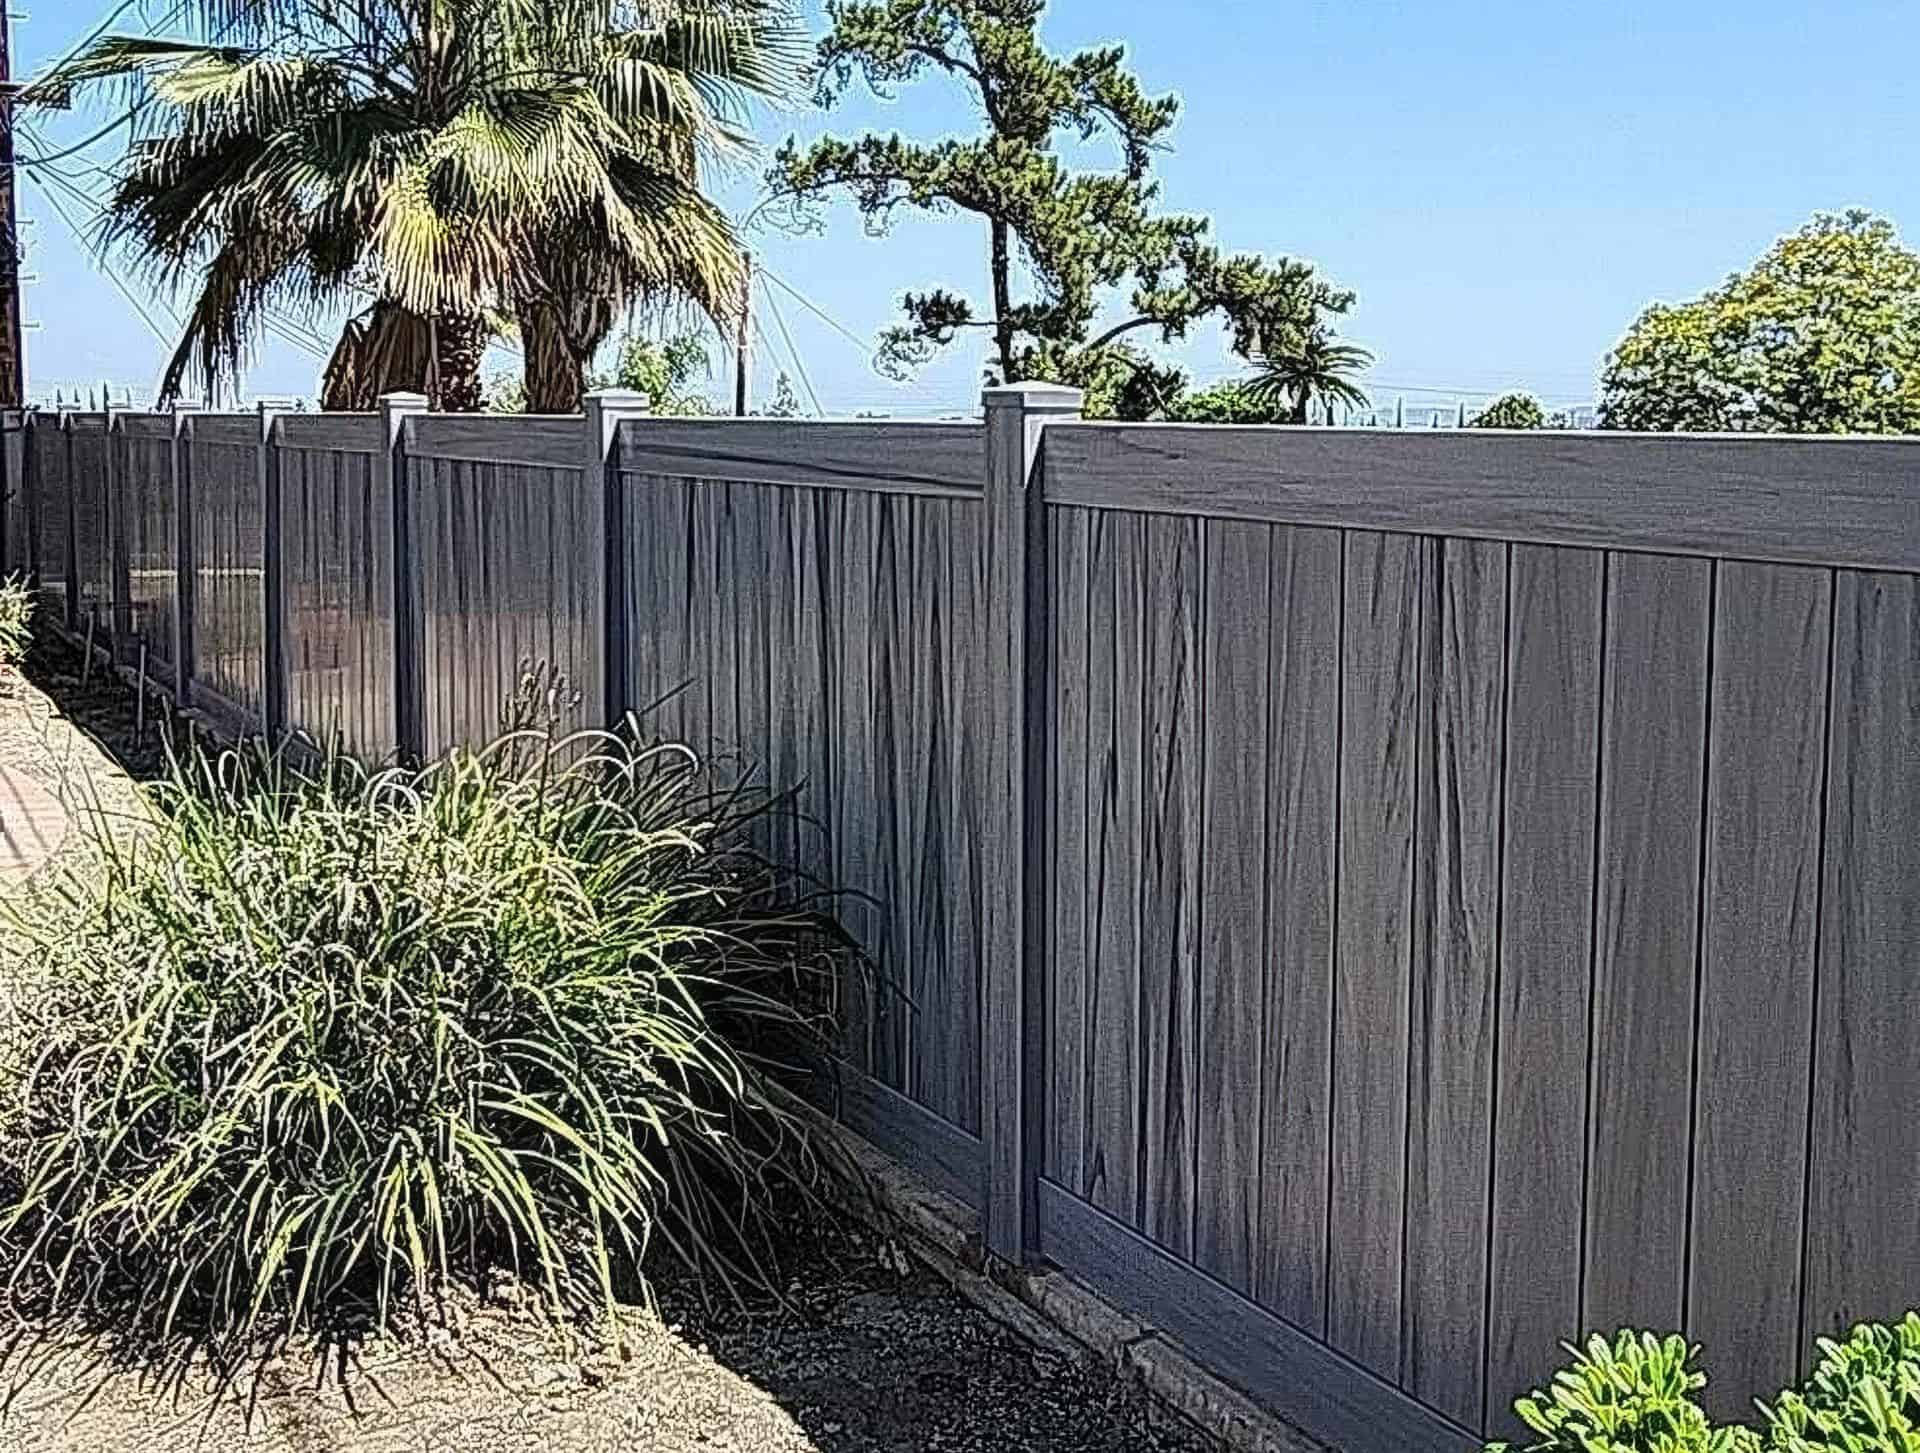 Vinyl coastal cedar colored fence in front of large palm tree and behind small bushes in backyard of suburban home